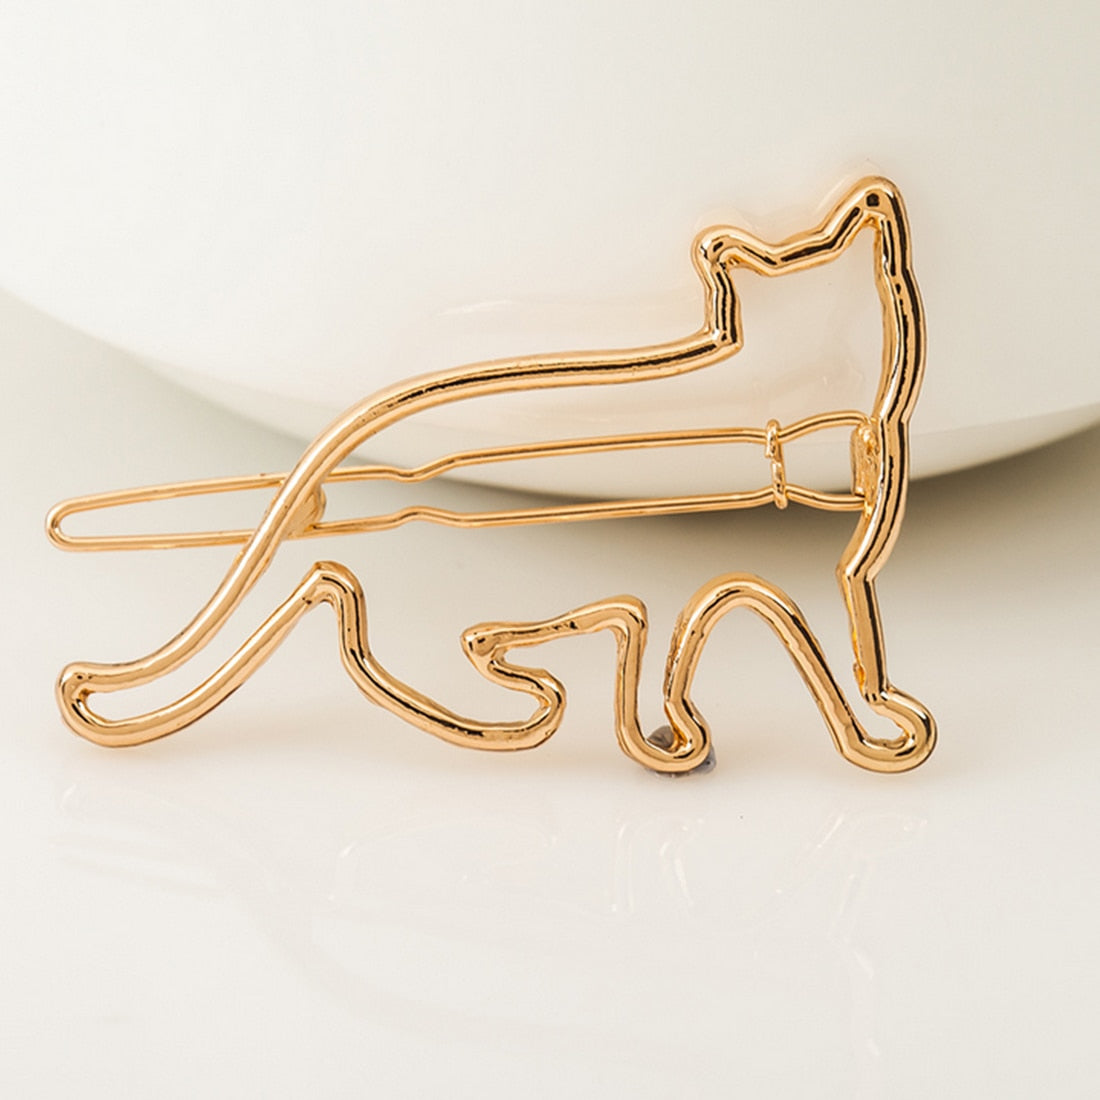 Metal hollow KT cat hairpin alloy frog clip hairpin clip hair accessories